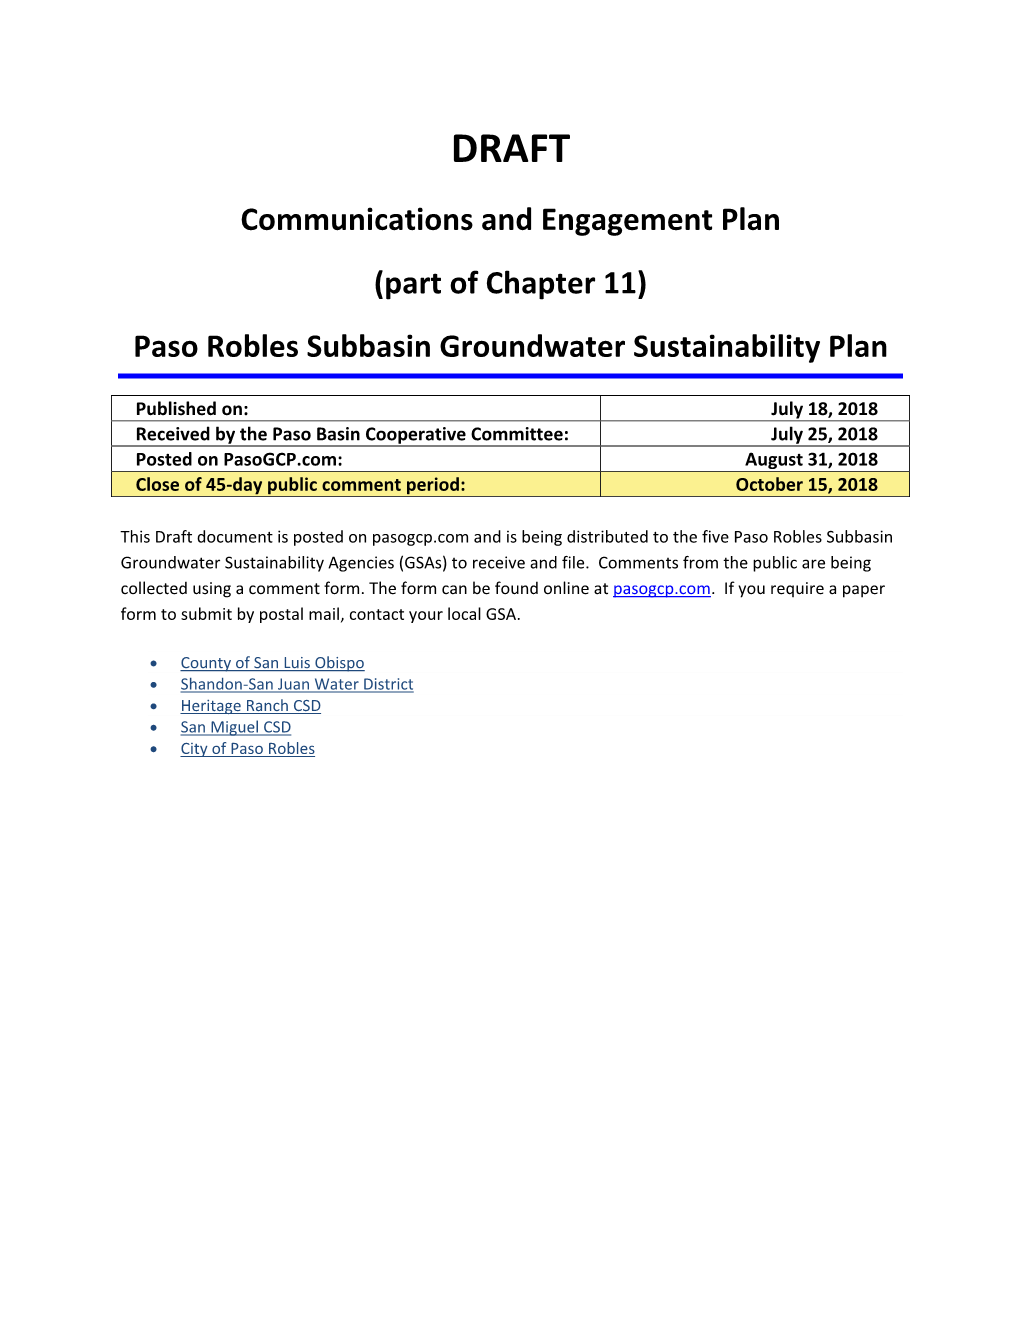 DRAFT Communications and Engagement Plan (Part of Chapter 11) Paso Robles Subbasin Groundwater Sustainability Plan